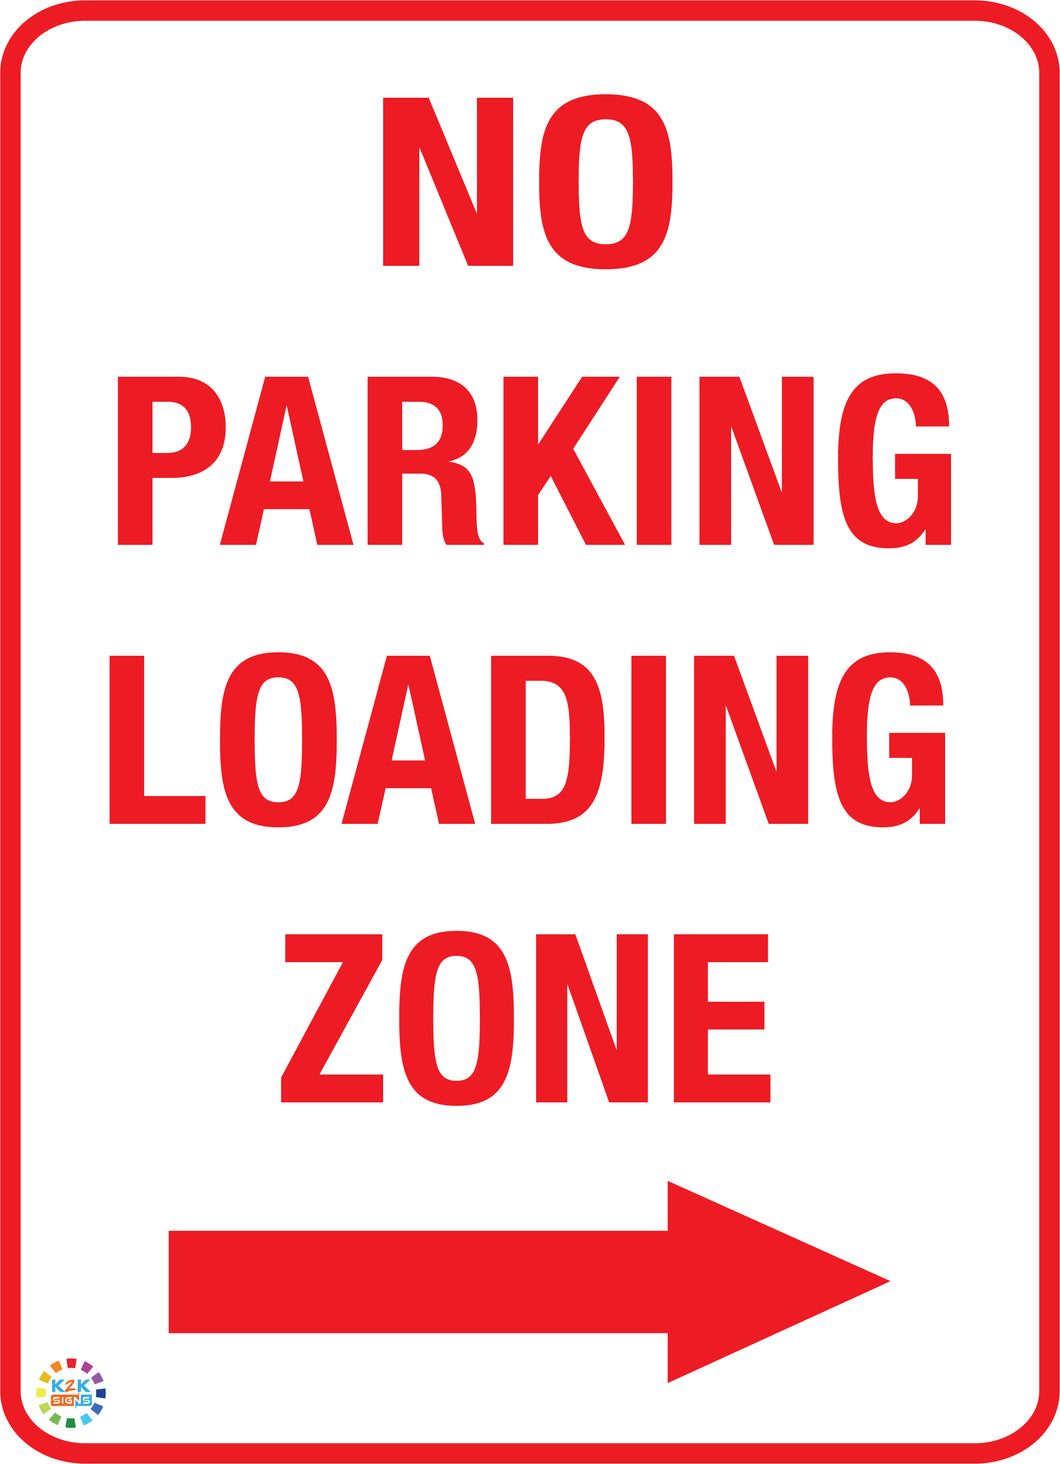 No Parking - Loading Zone (Right Arrow) sign.